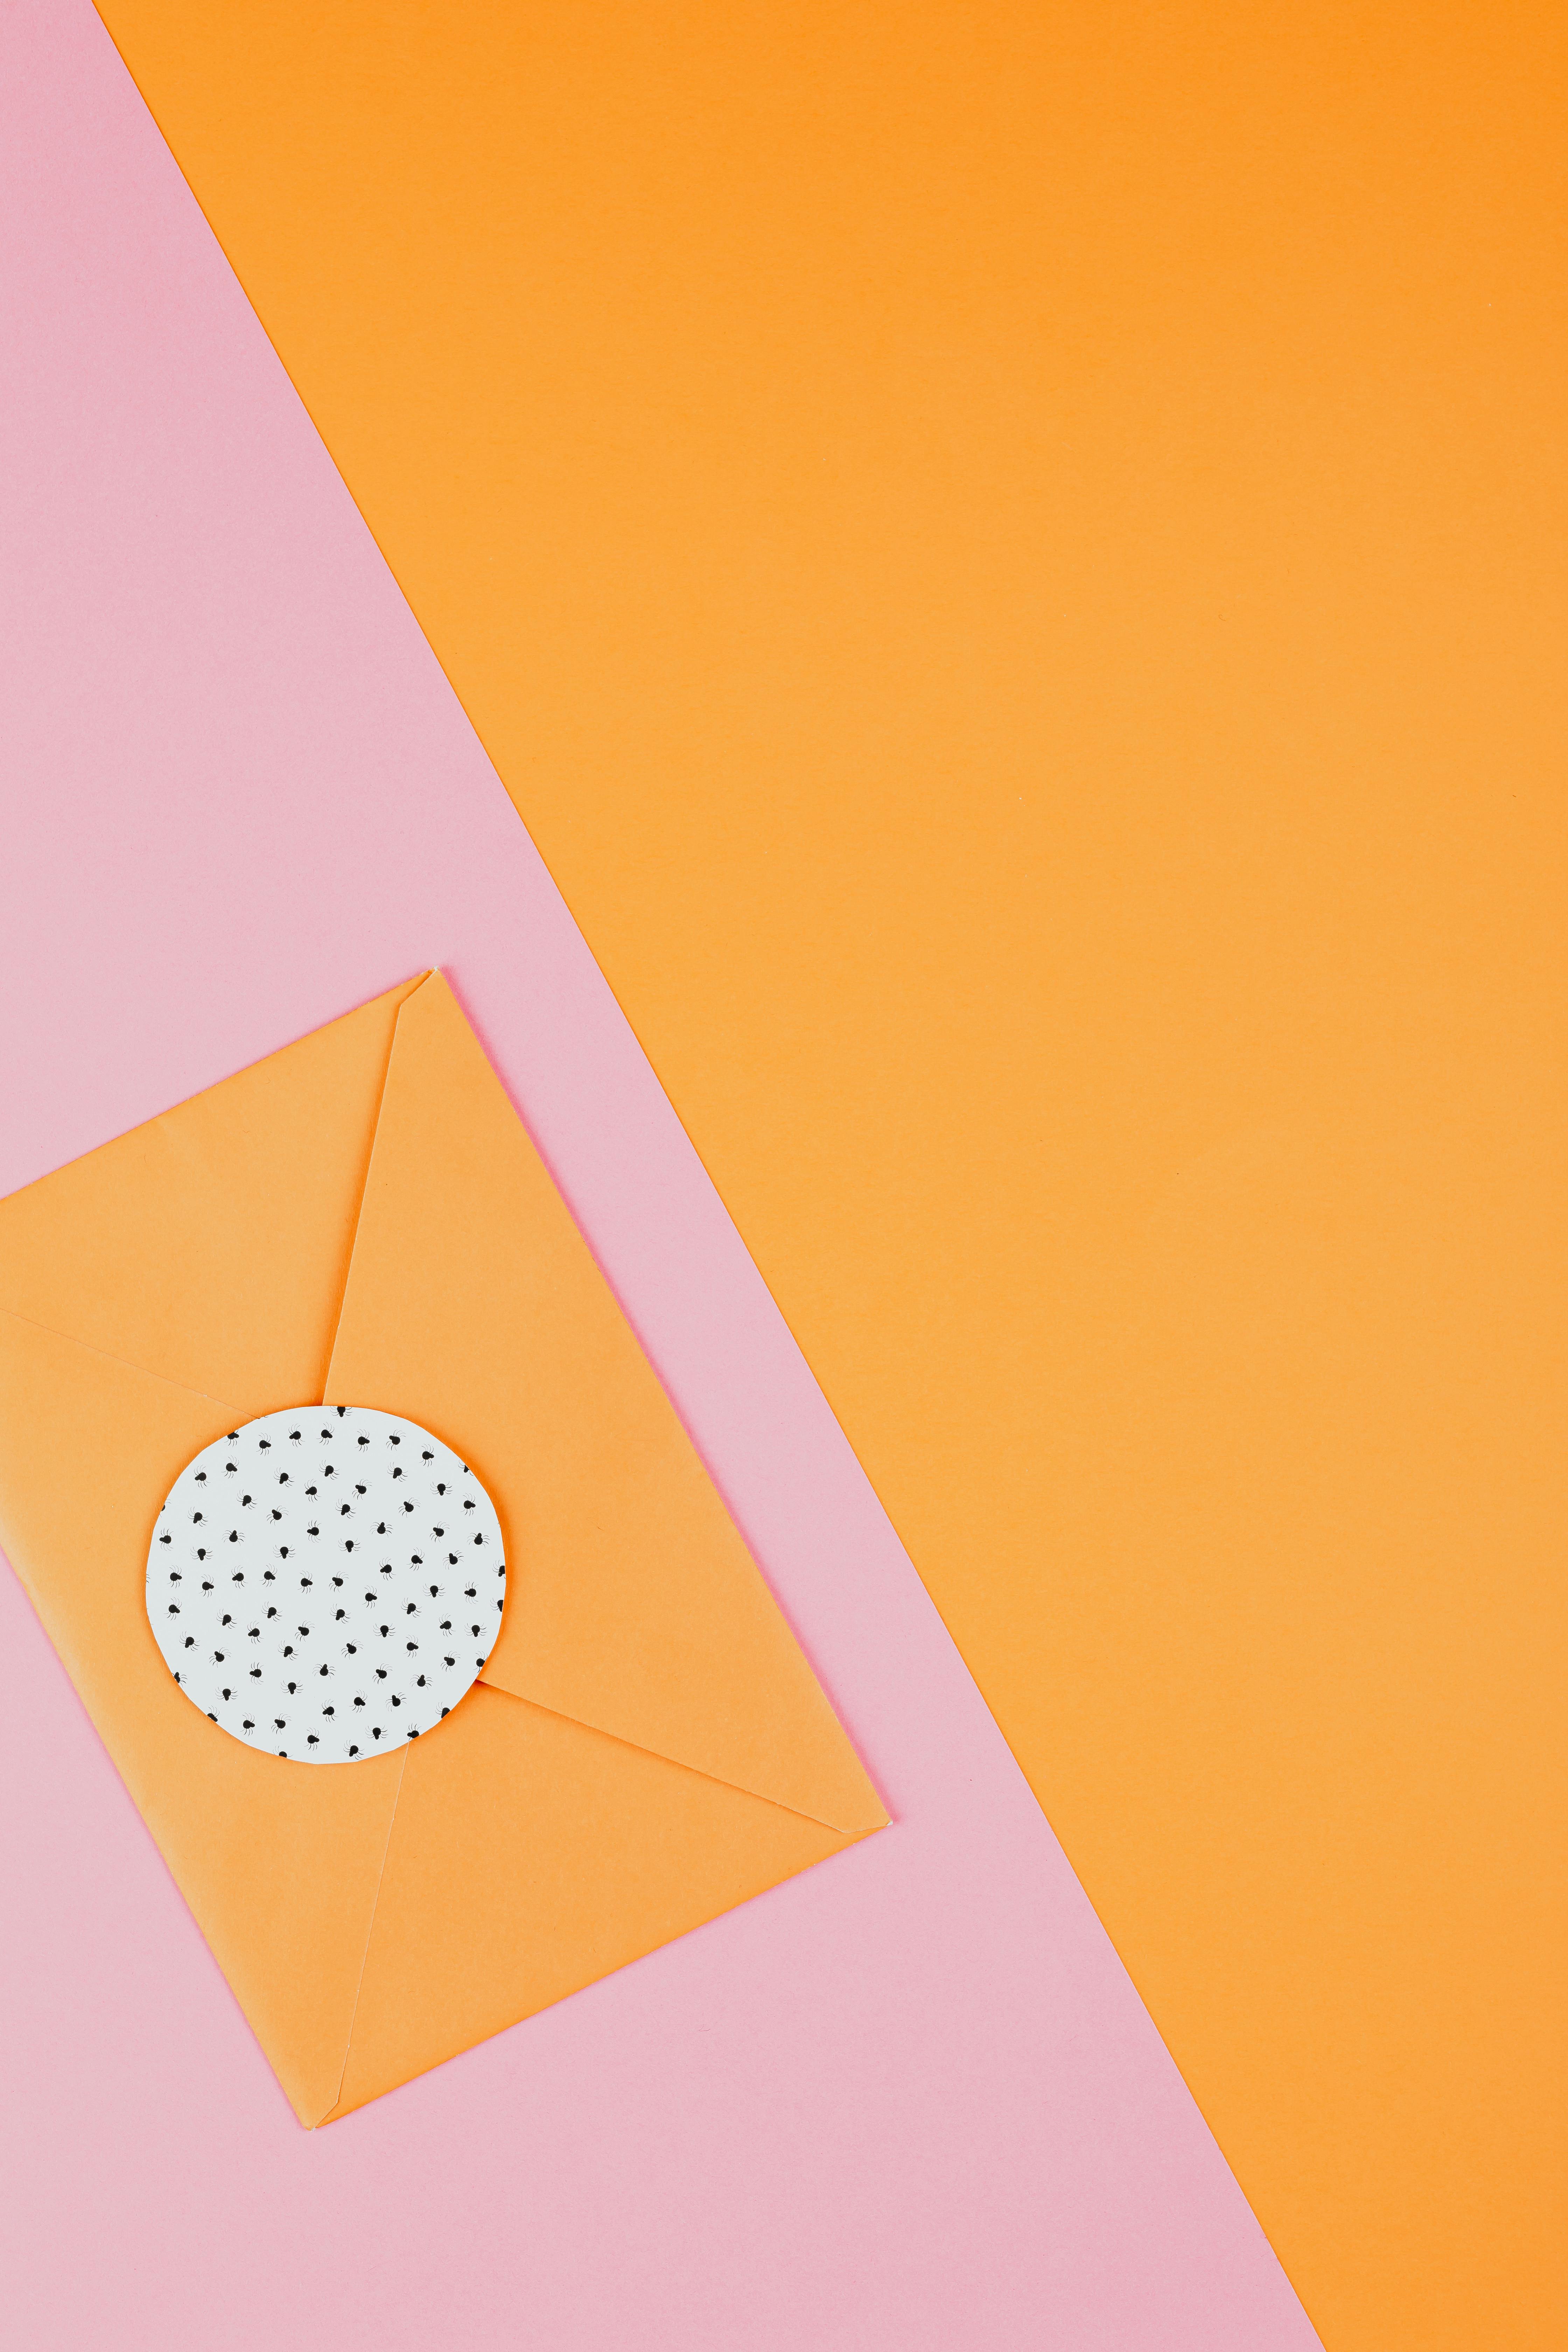 An unopened, carrot-orange-colored envelope is placed on overlapped sheets of orange and pink paper.